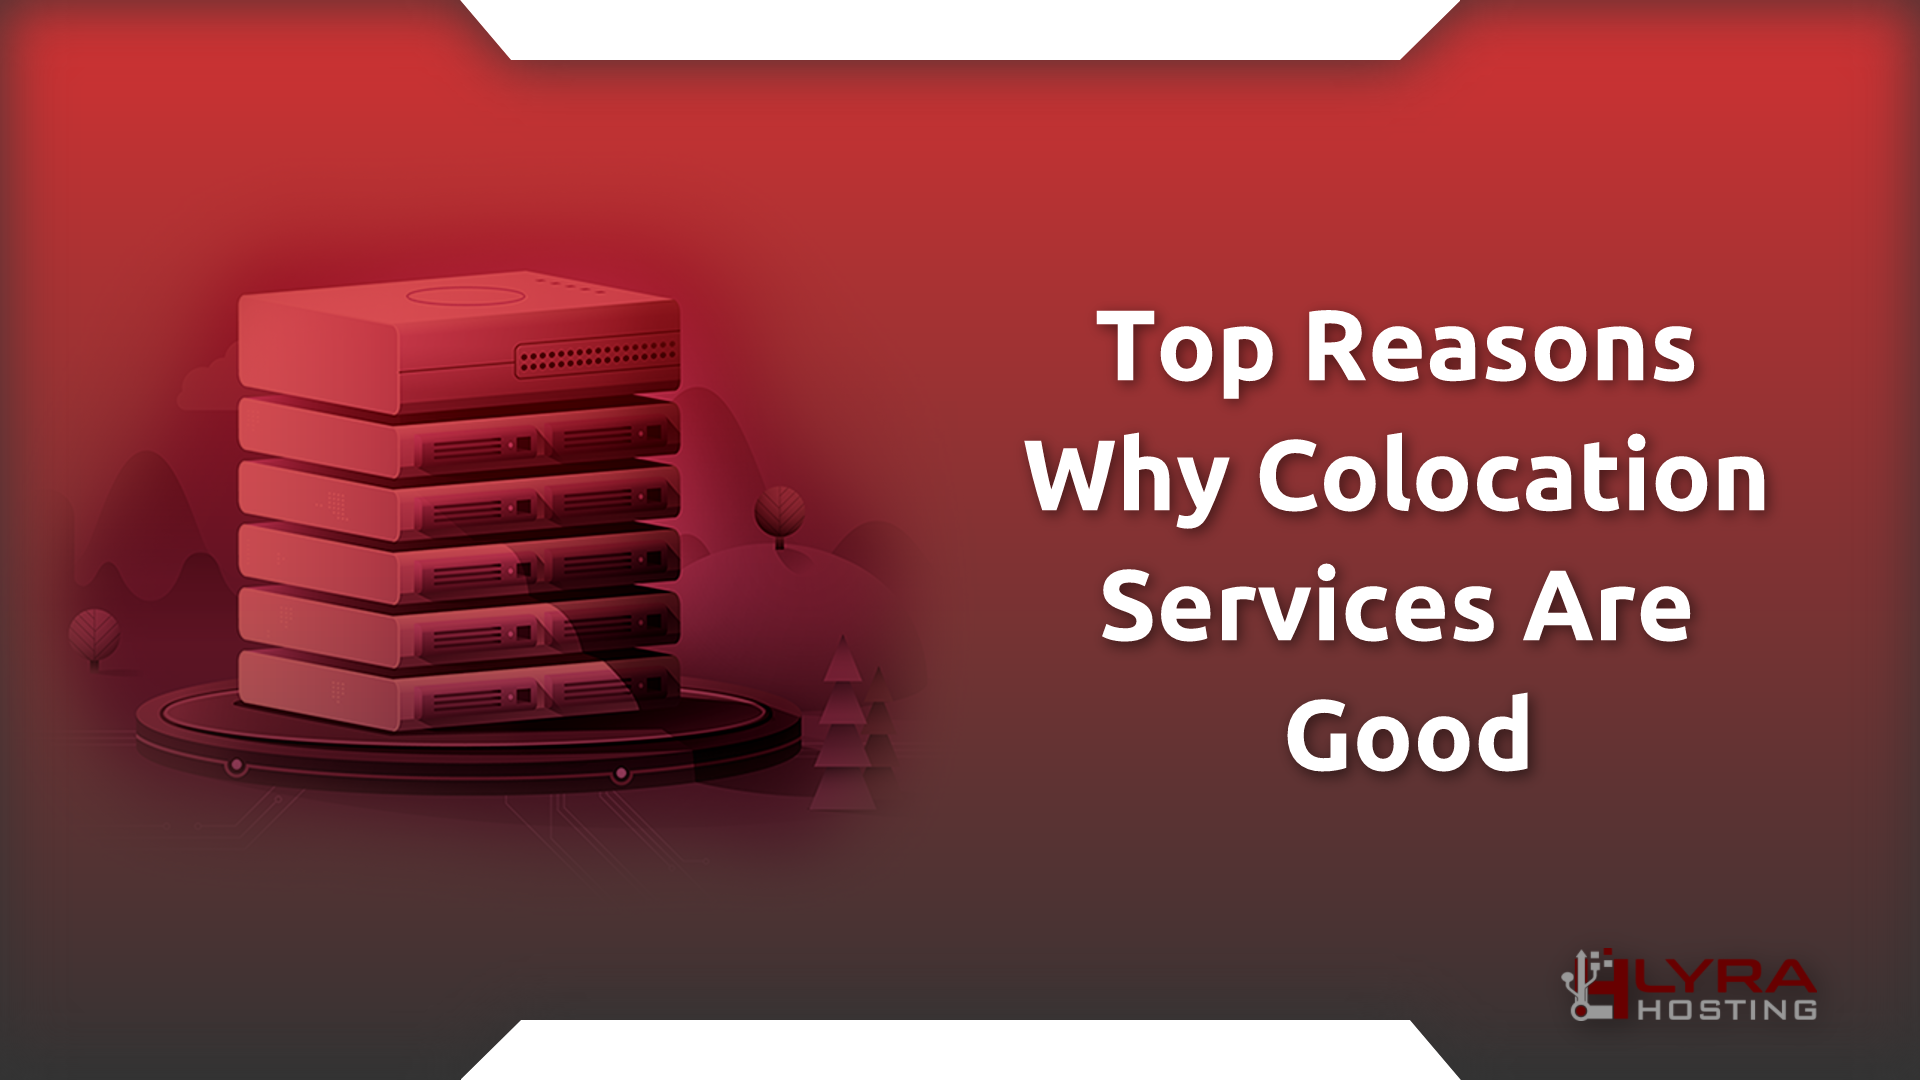 Top Reasons Why Colocation Services Are Good